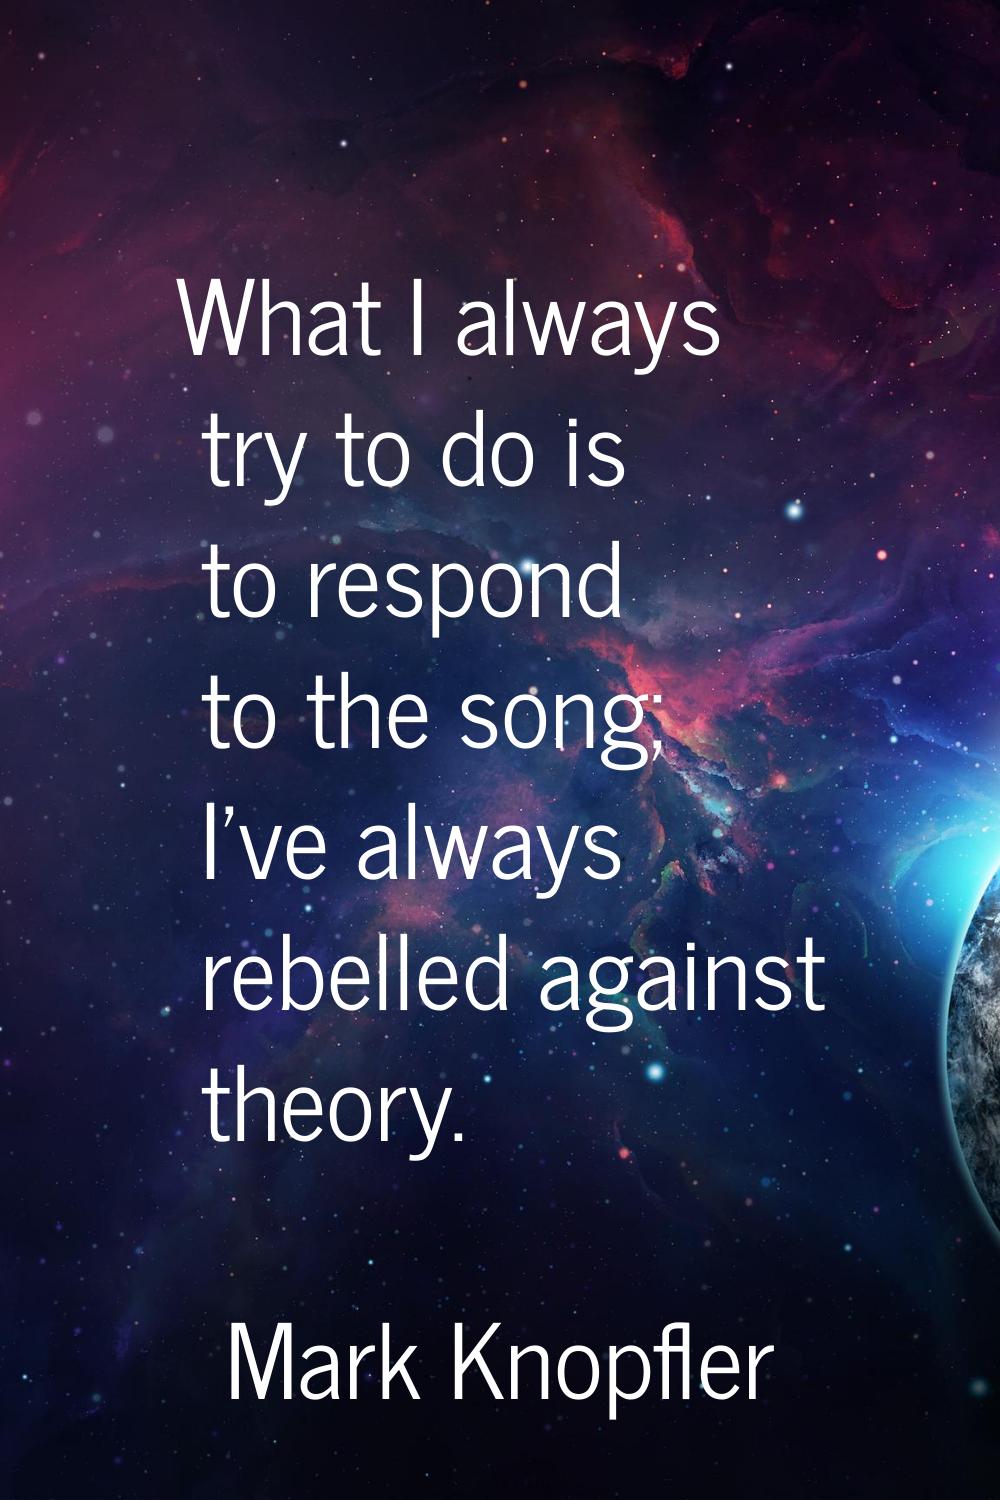 What I always try to do is to respond to the song; I've always rebelled against theory.